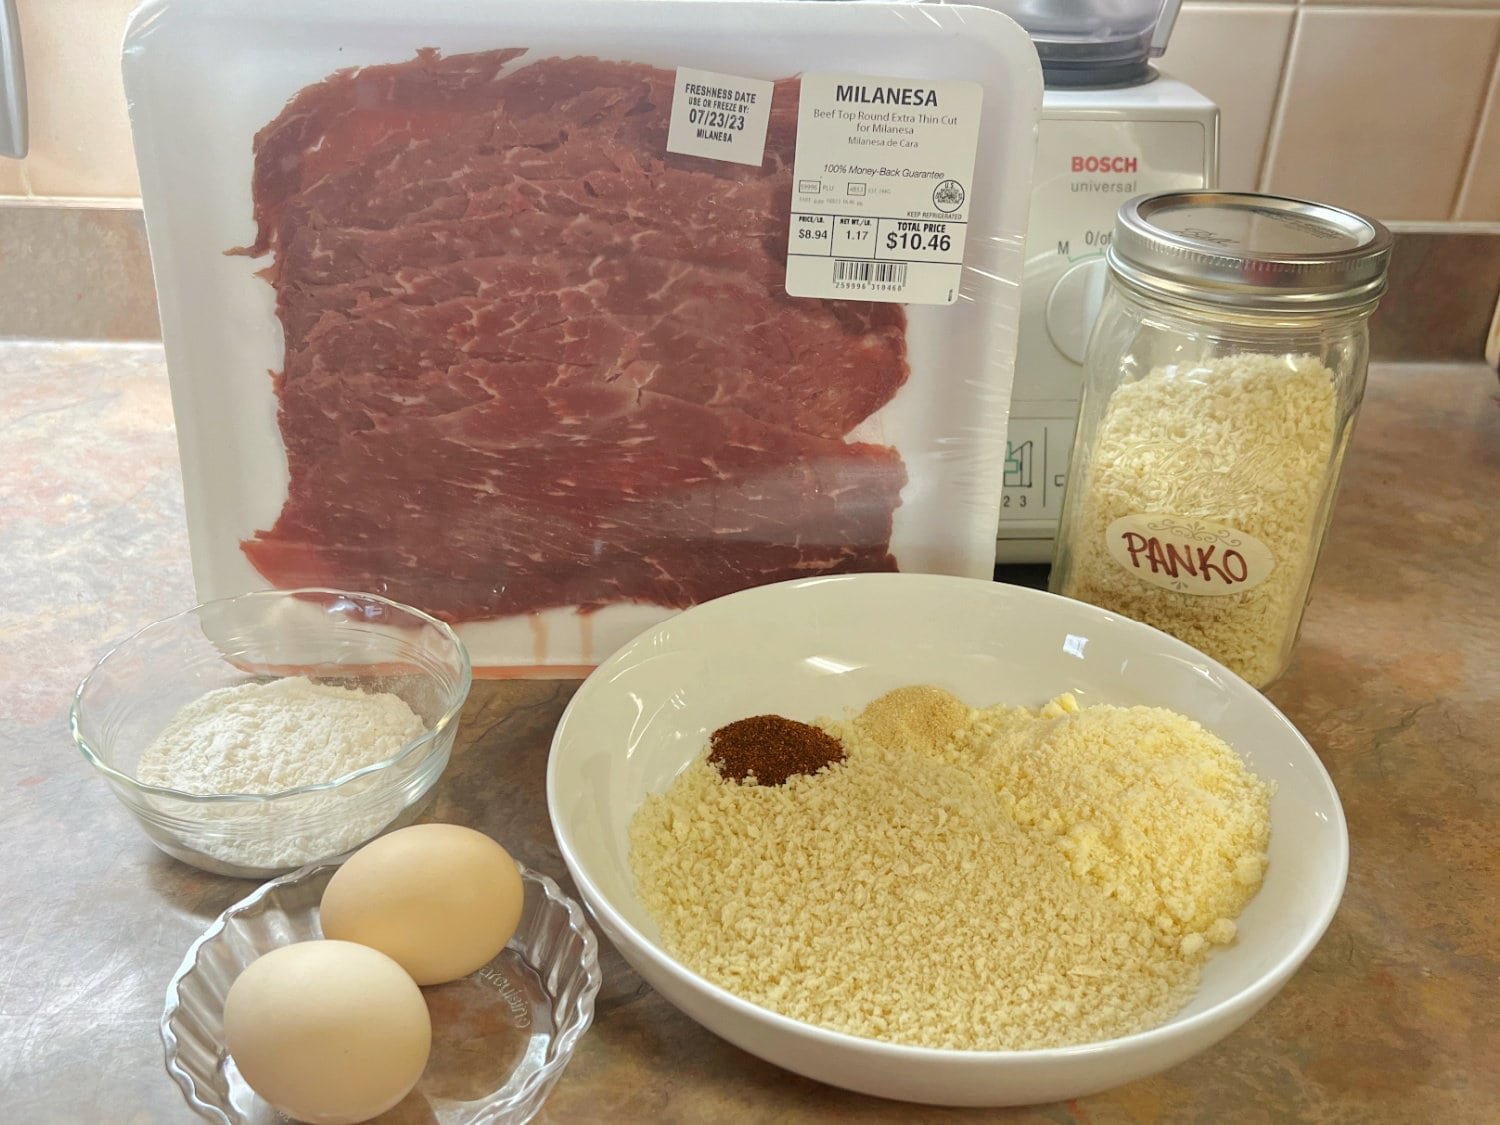 All the ingredients needed to make Steak Milanesa.